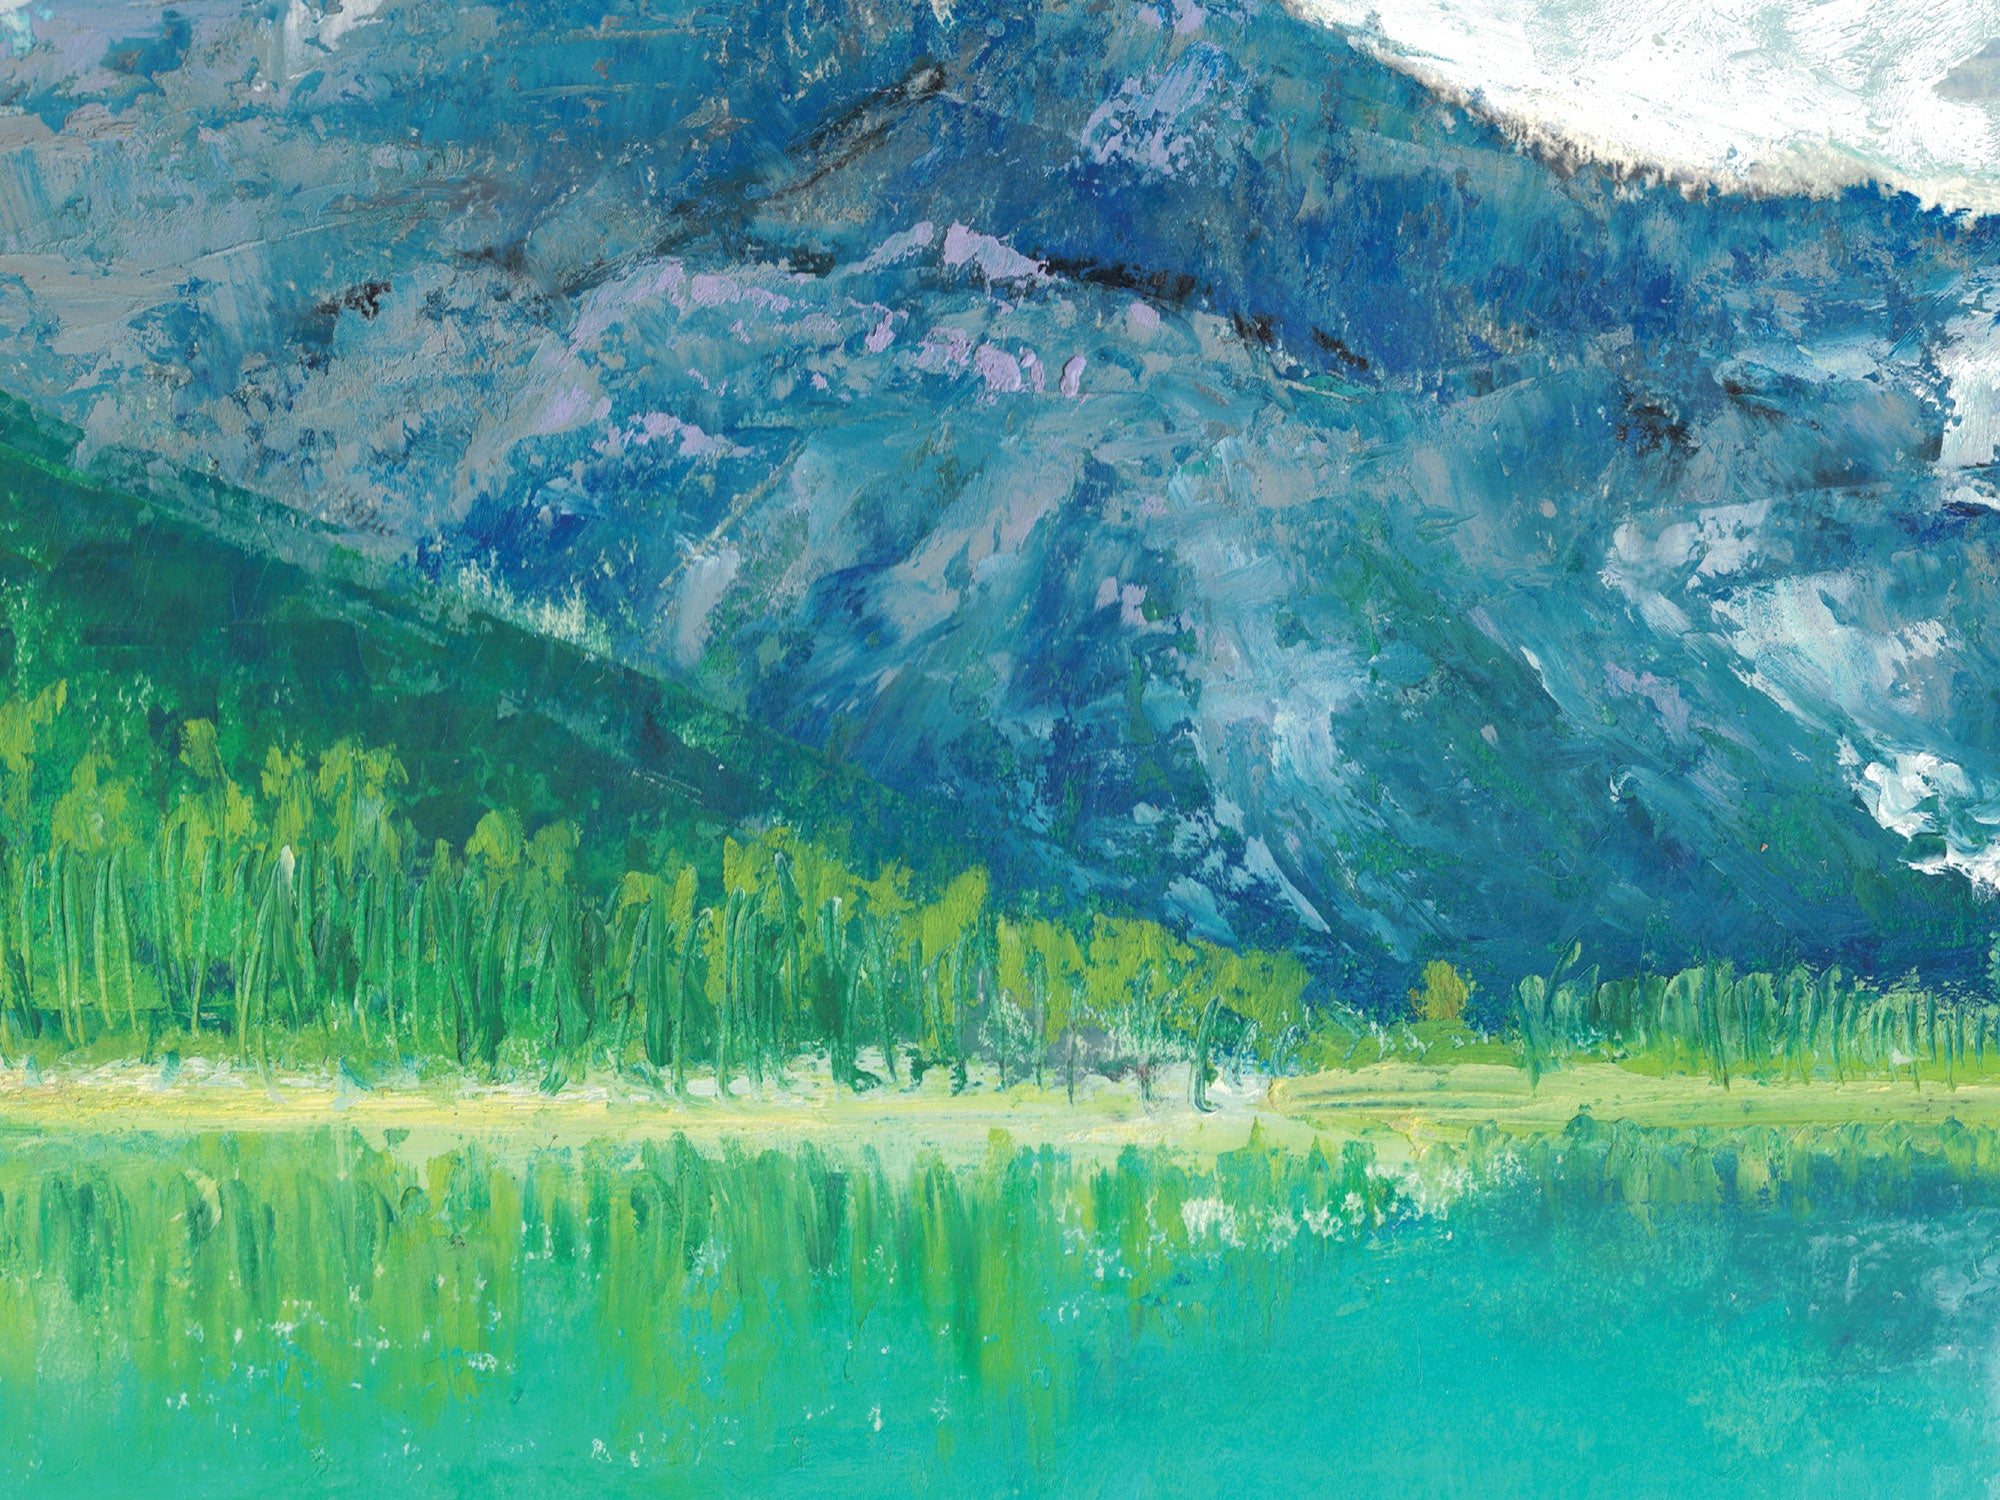 Mountain Scenery Oil Painting Digital Download | Travel Series - Emerald Lake, Canada